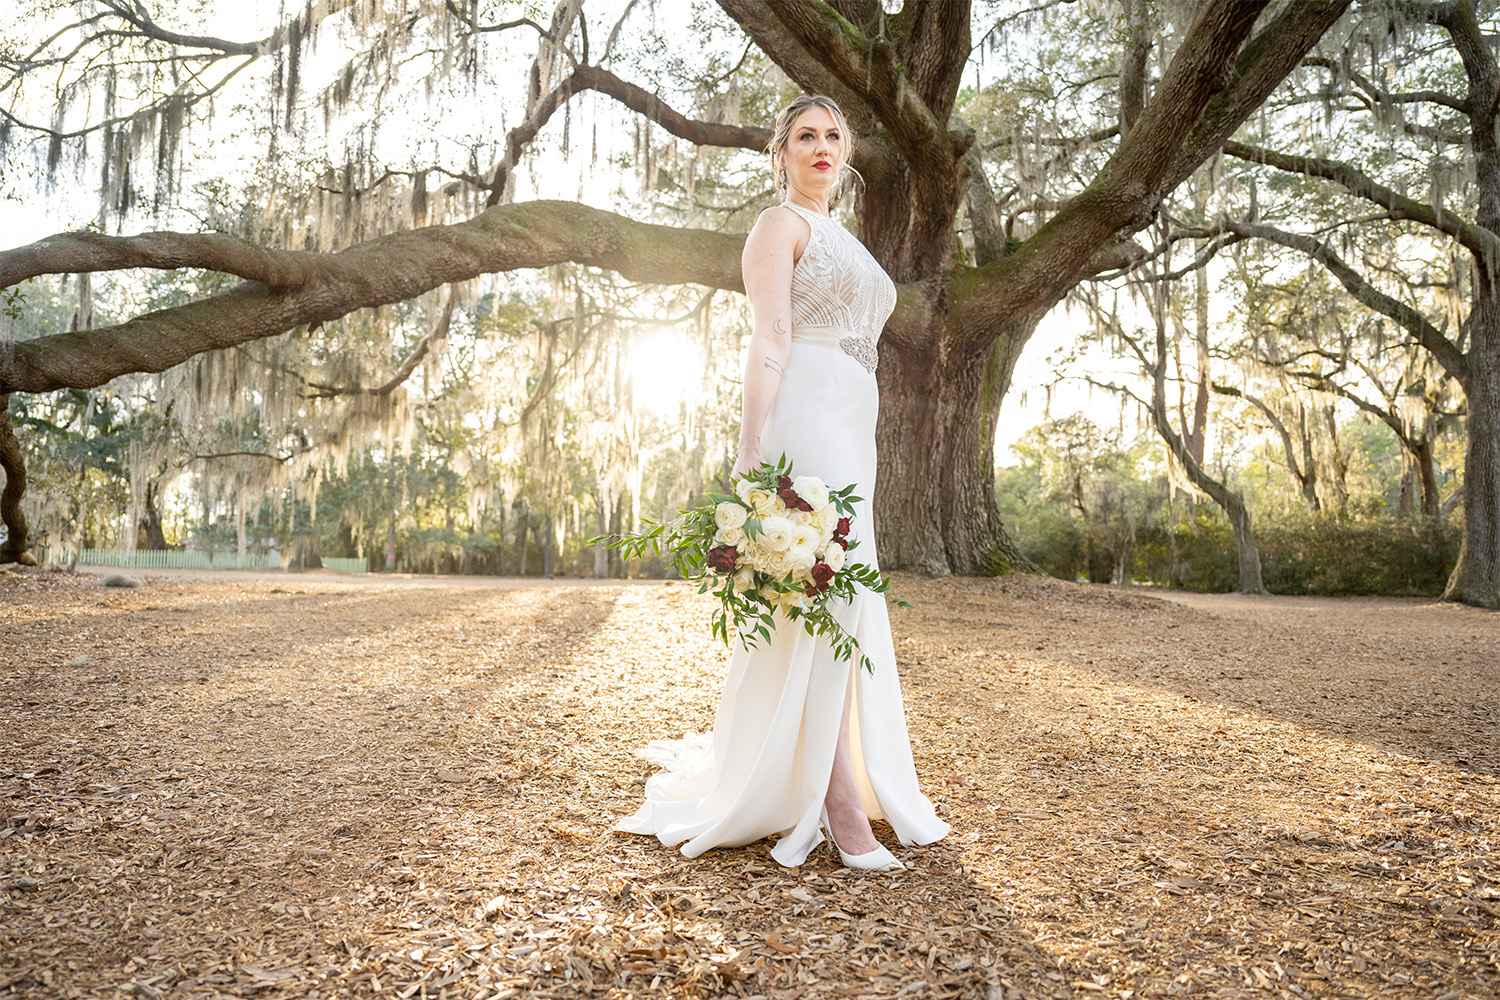 Bride holding wedding bouquet with a huge oak tree in the background